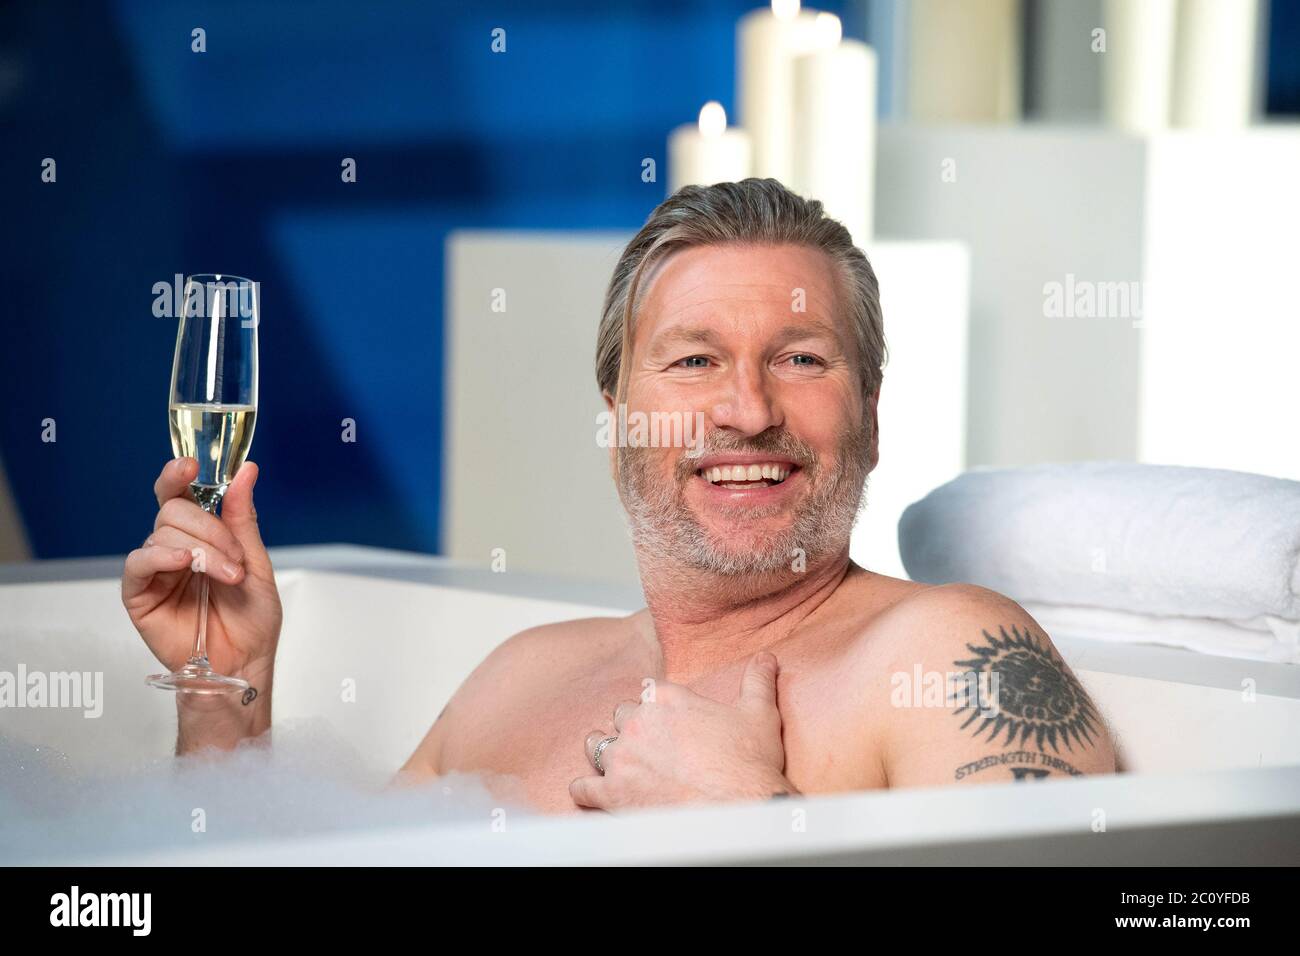 A Behind The Scenes Photo Of Robbie Savage As He Re Creates The Infamous Bath Scene From The